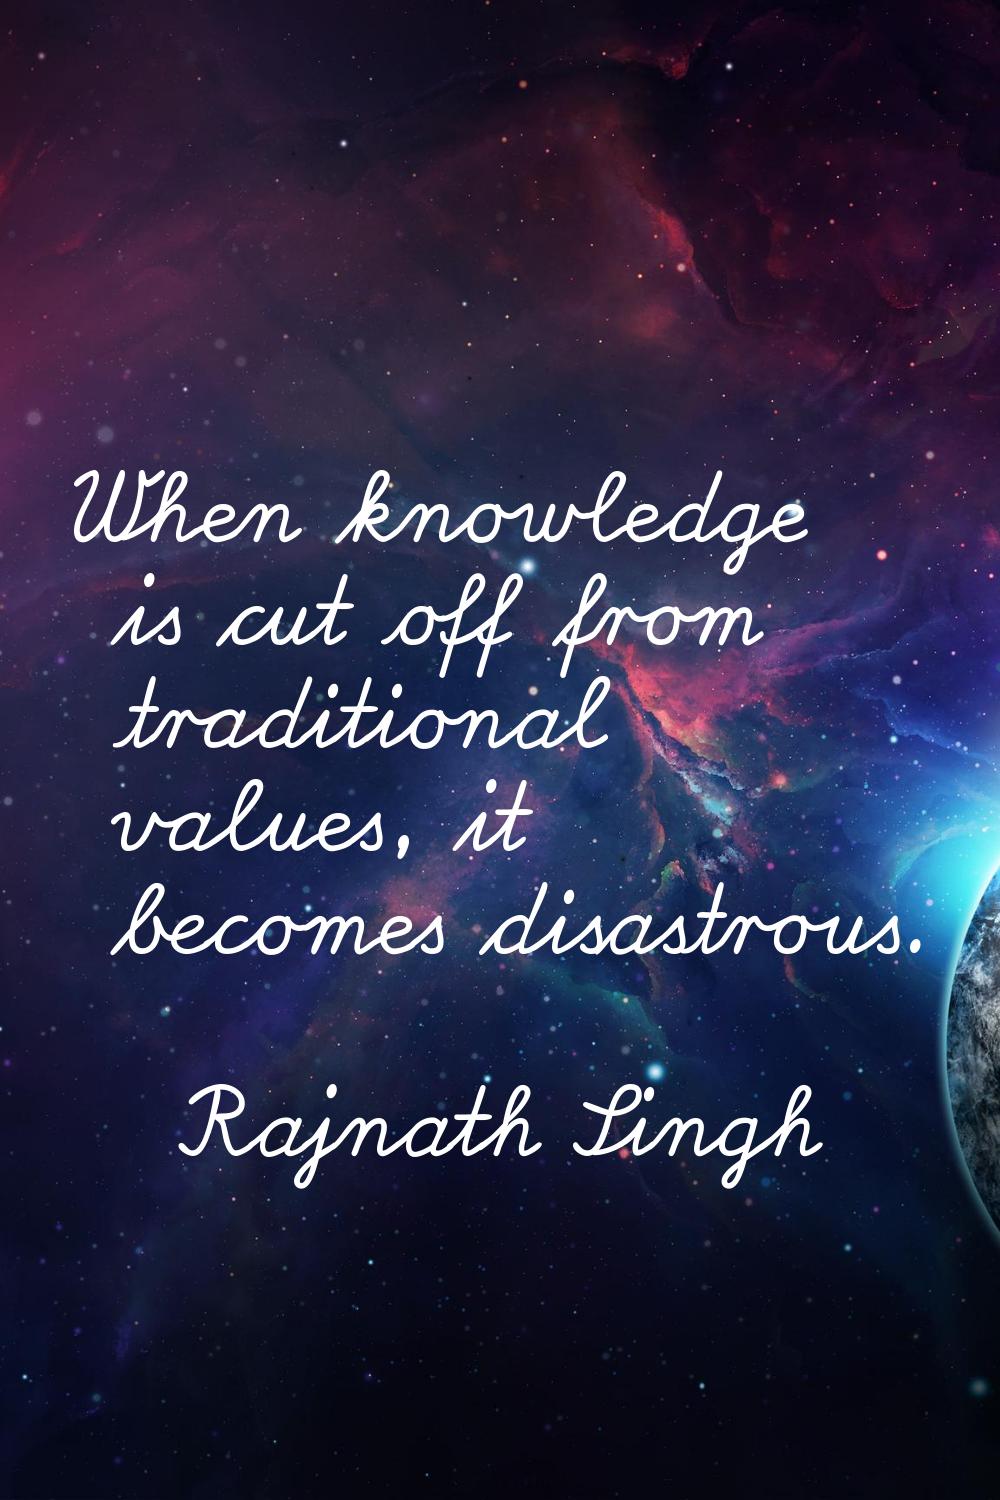 When knowledge is cut off from traditional values, it becomes disastrous.